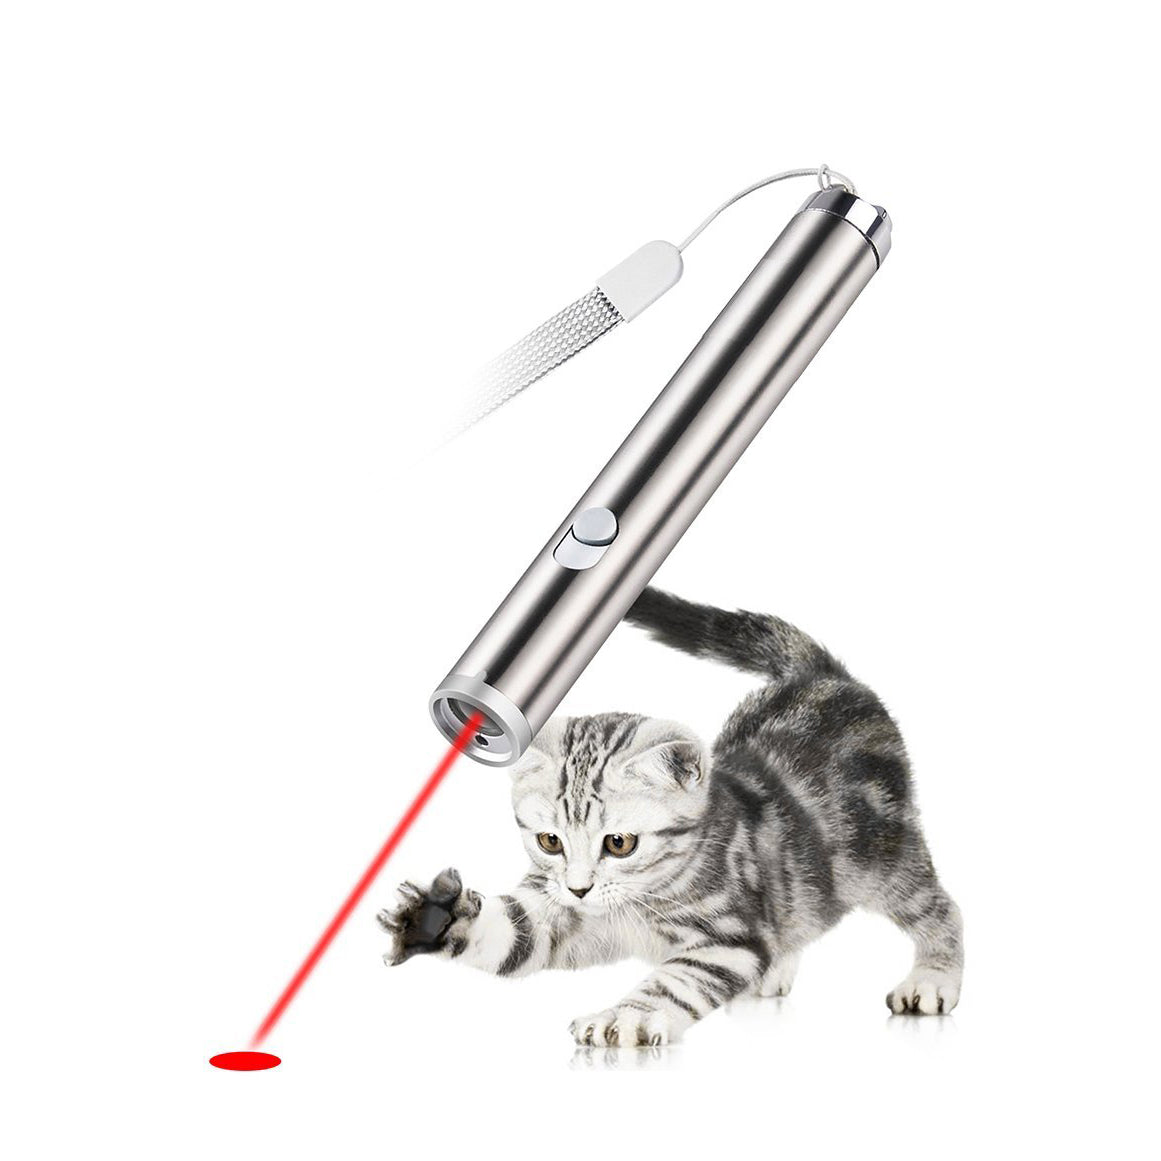 Loskii PT-30 Electronic Pet Toys Cat Interactive Training Toy Red Laser Pointer With LED Flashlight